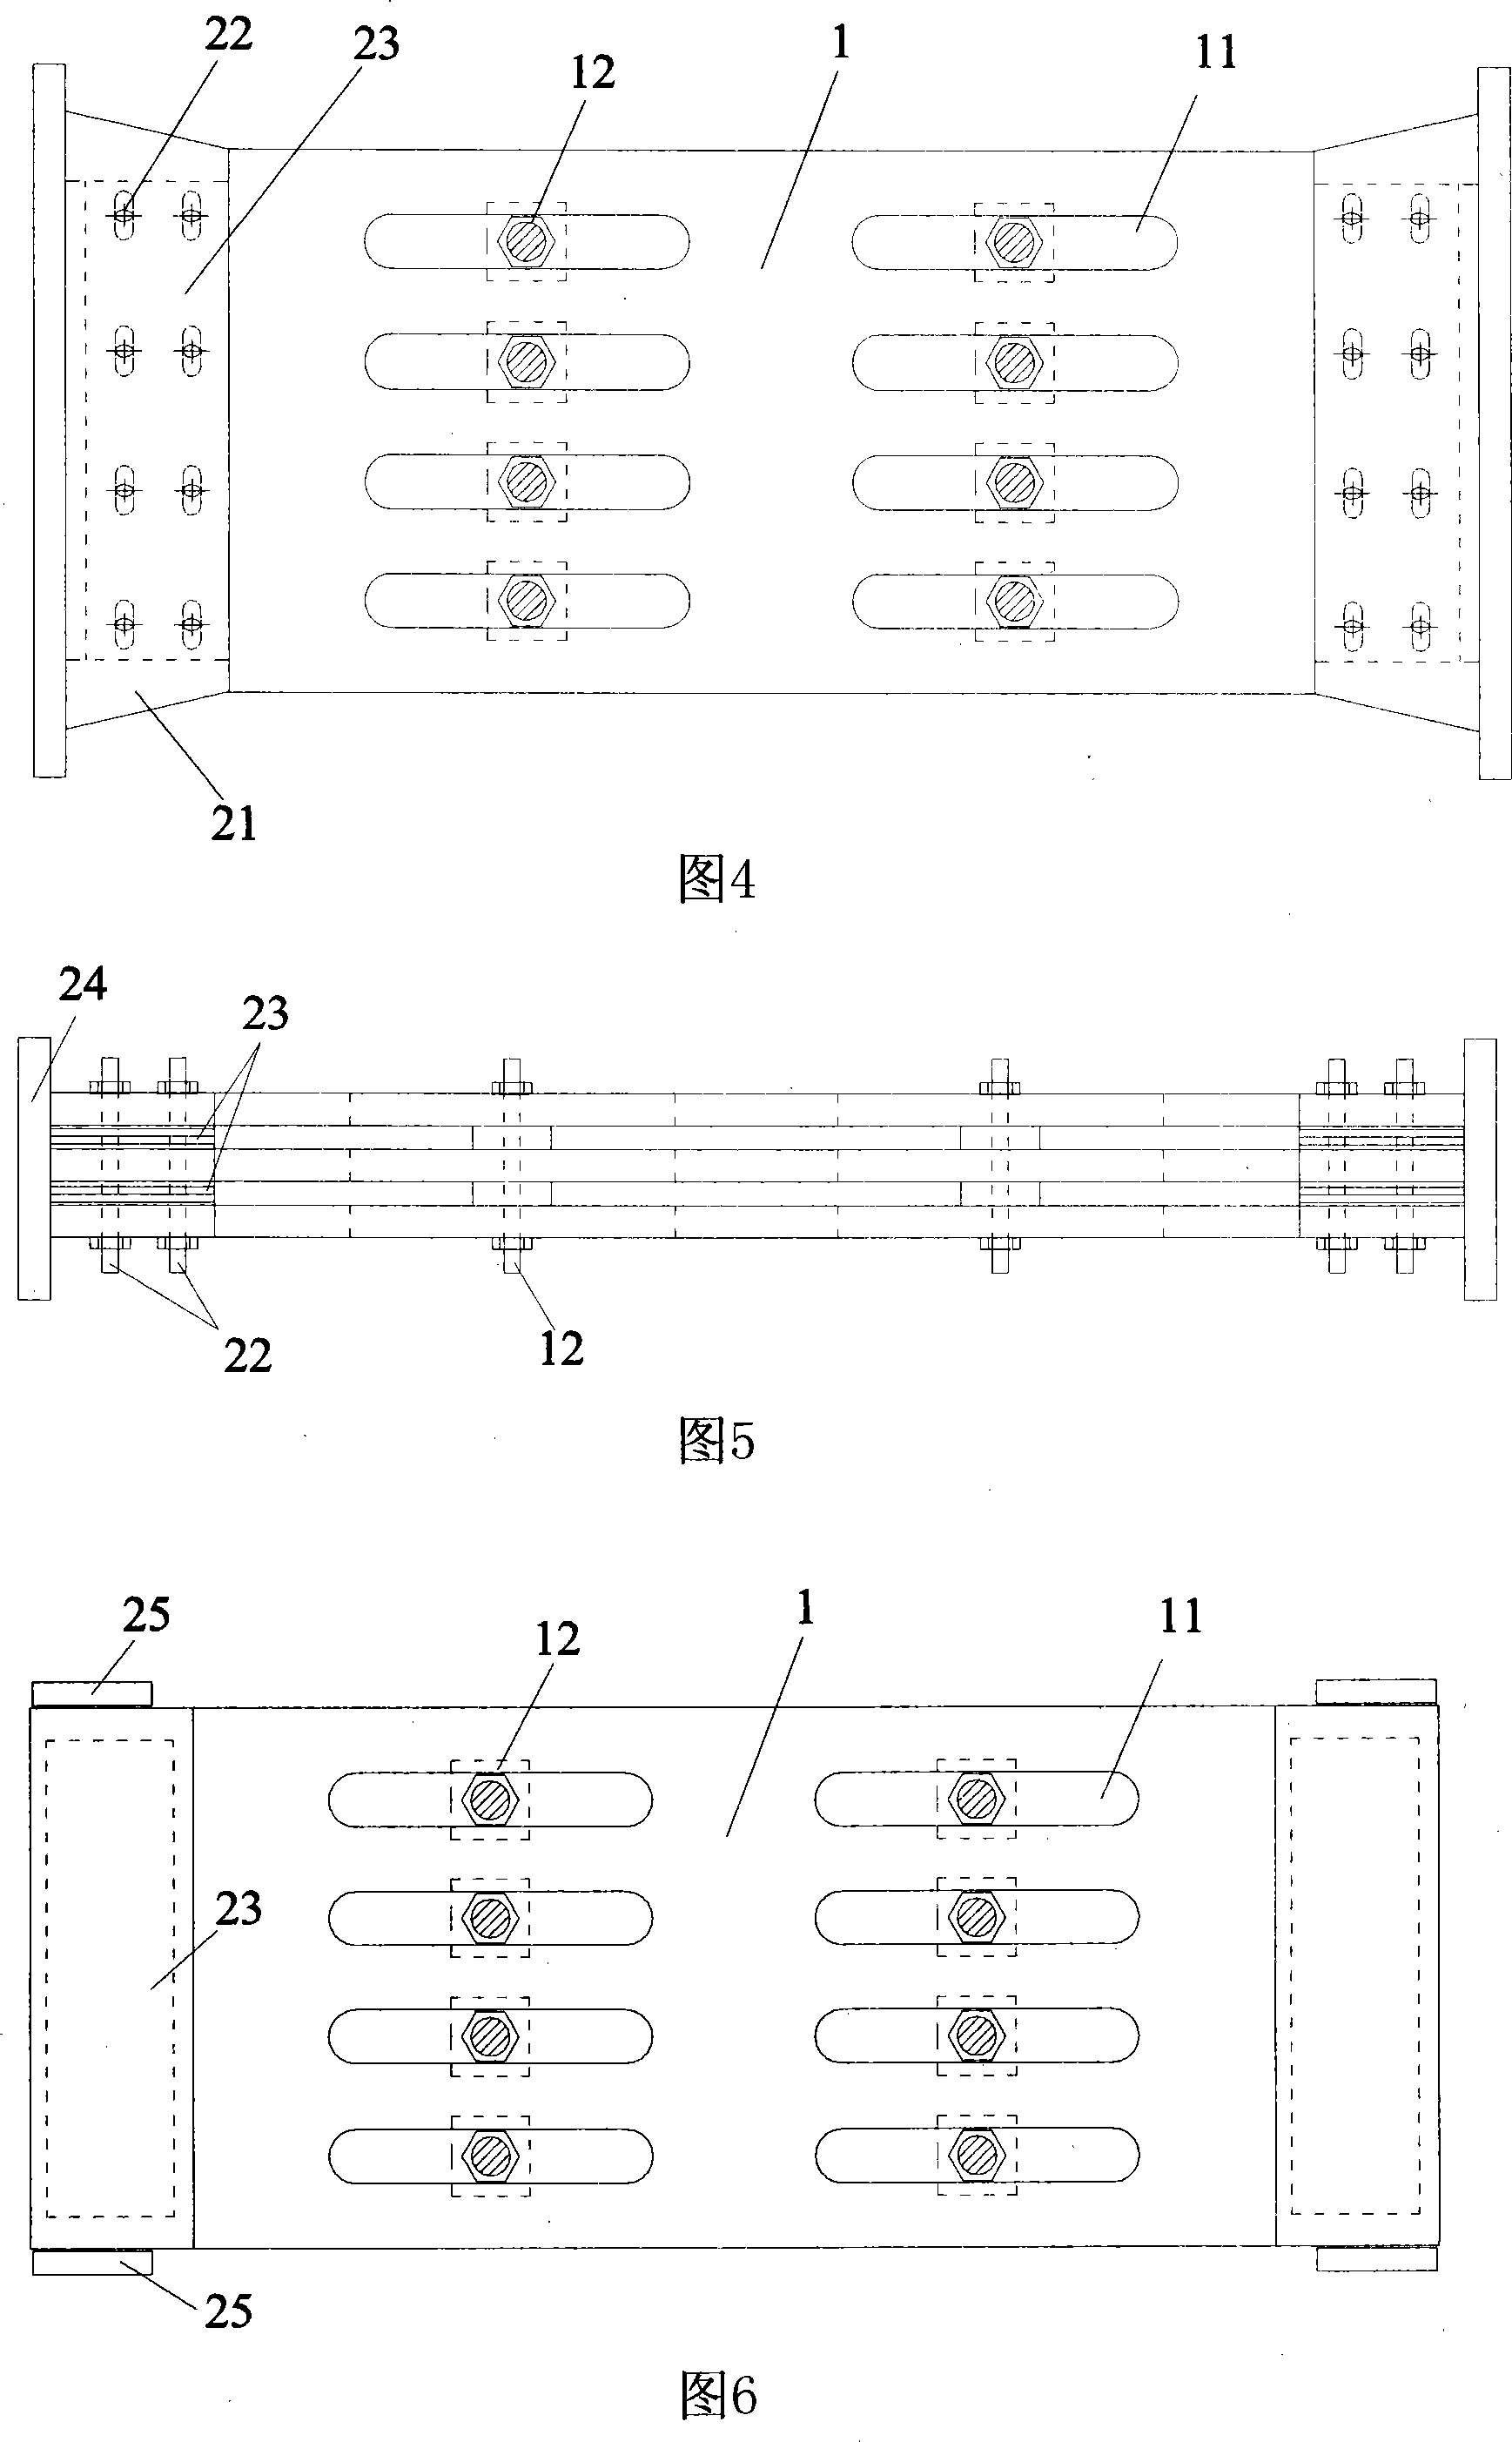 Coupled shearing force wall energy-dissipation beam-coupled steel plate damper and its using method